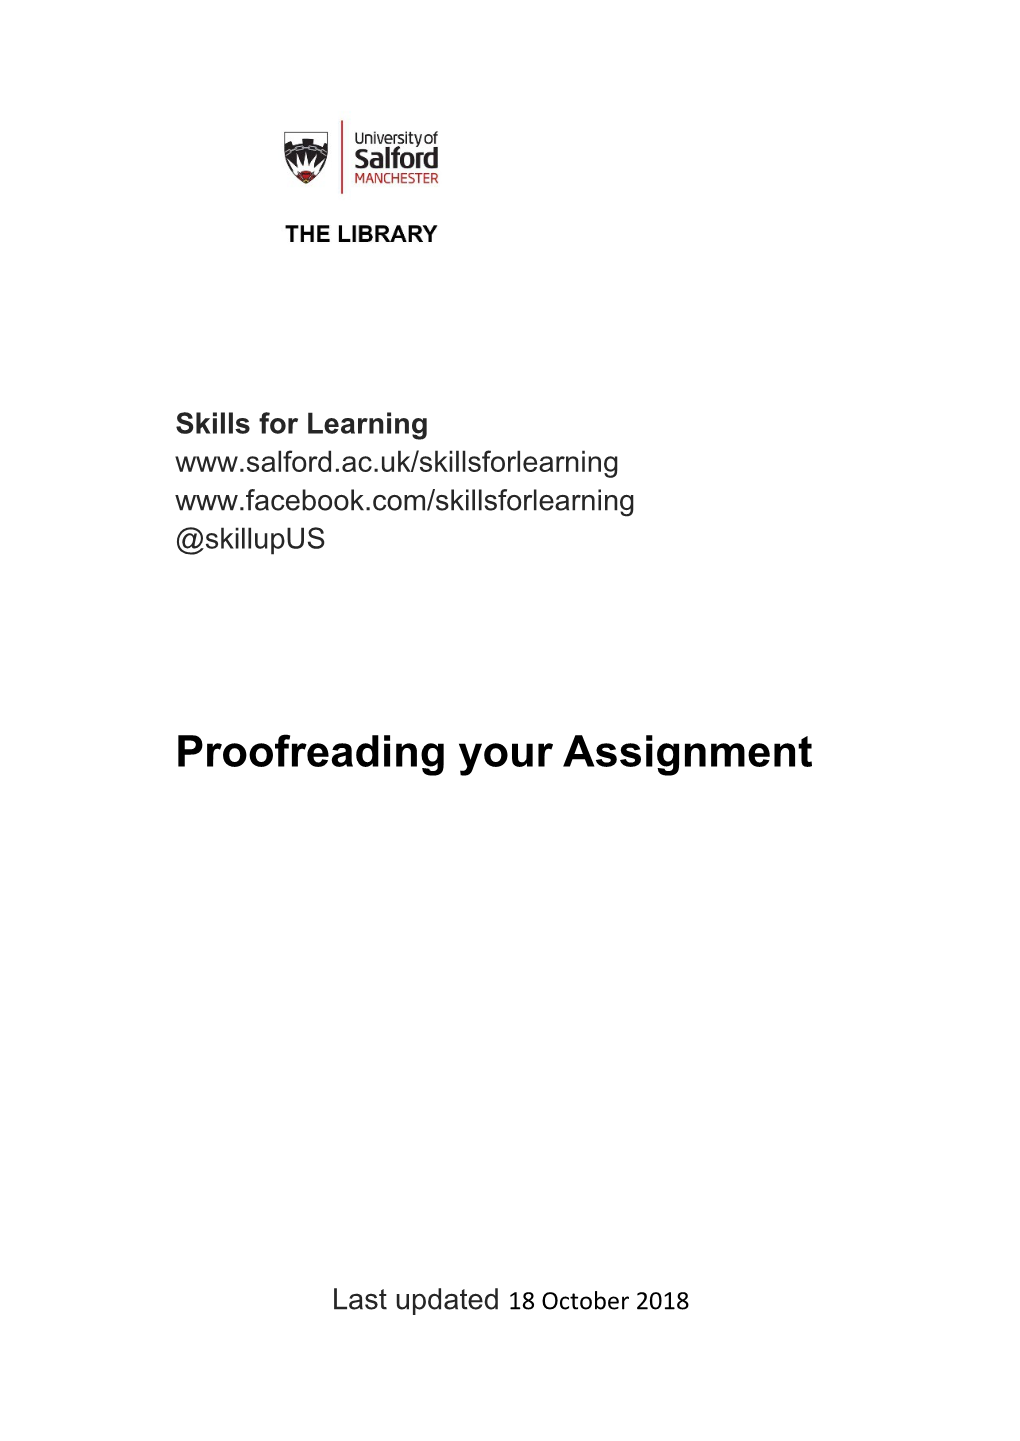 Proofreading Your Assignment